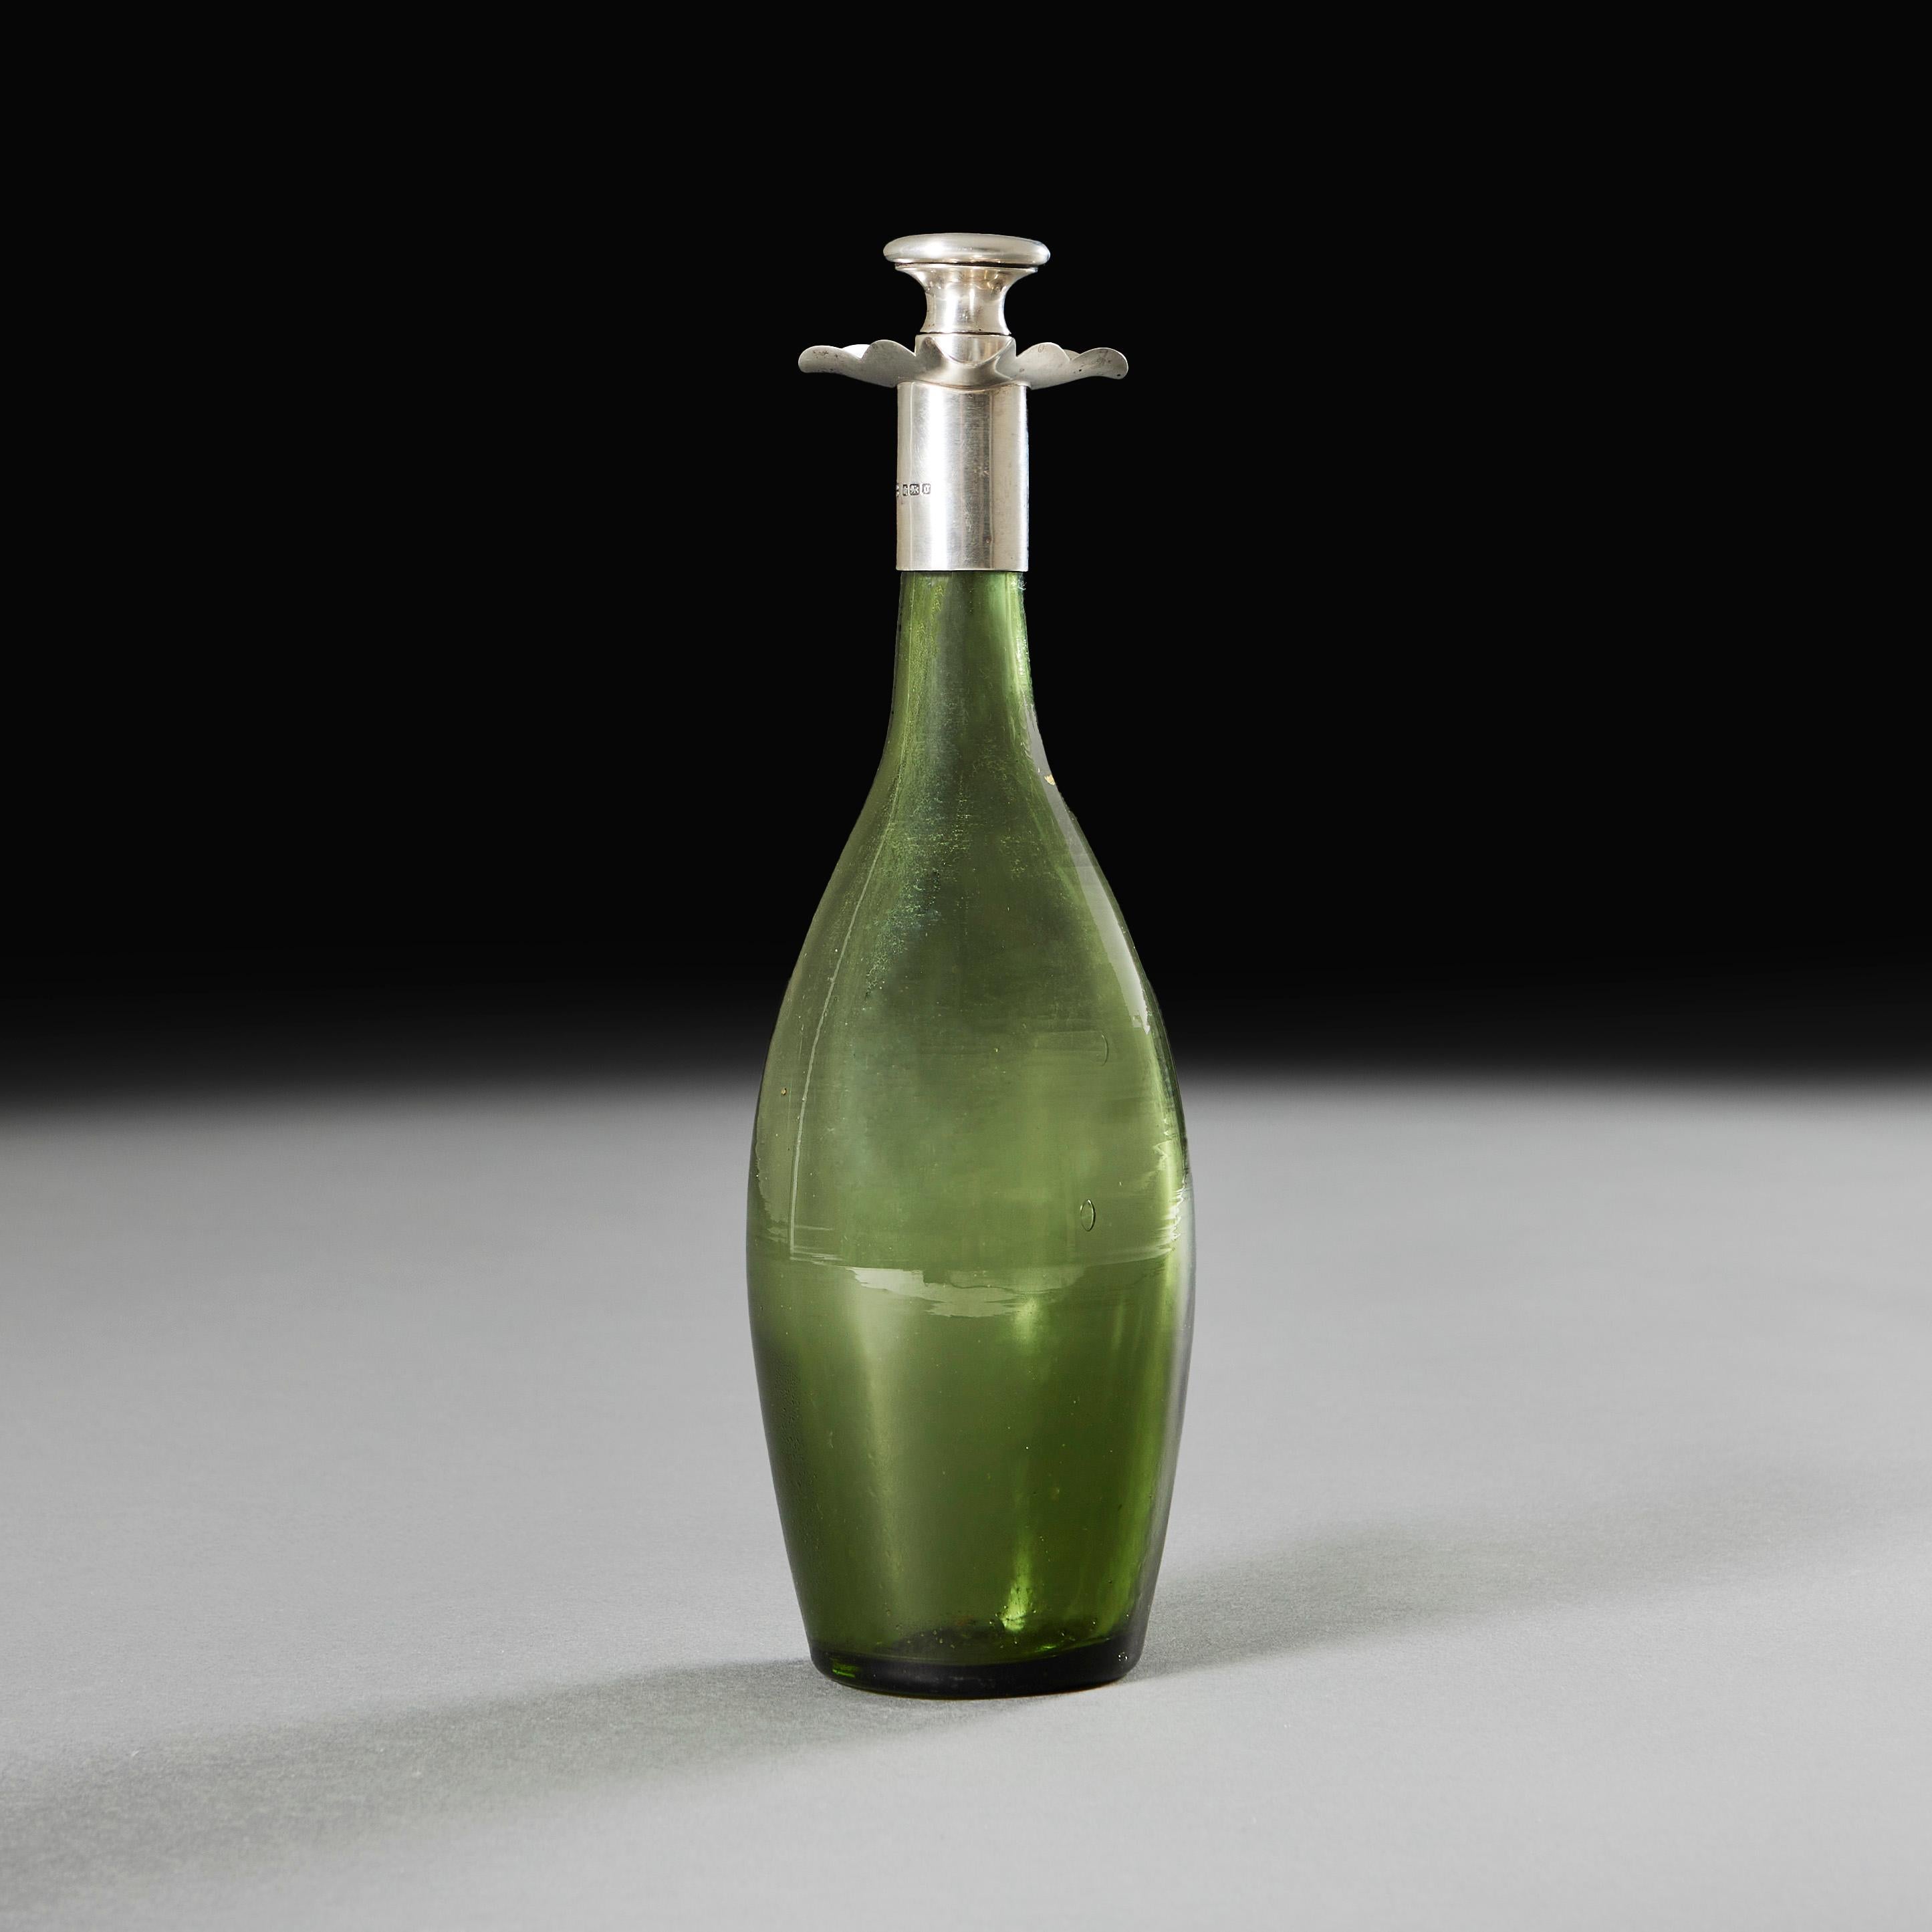 An Edwardian light green glass spirit decanter with silver collar and unusual trefoil pouring system, with circular silver stopper engraved with an M. Hallmarks to the collar and stopper. By James Deakin & Son, Sheffield, Founded 1866.

Sheffield,